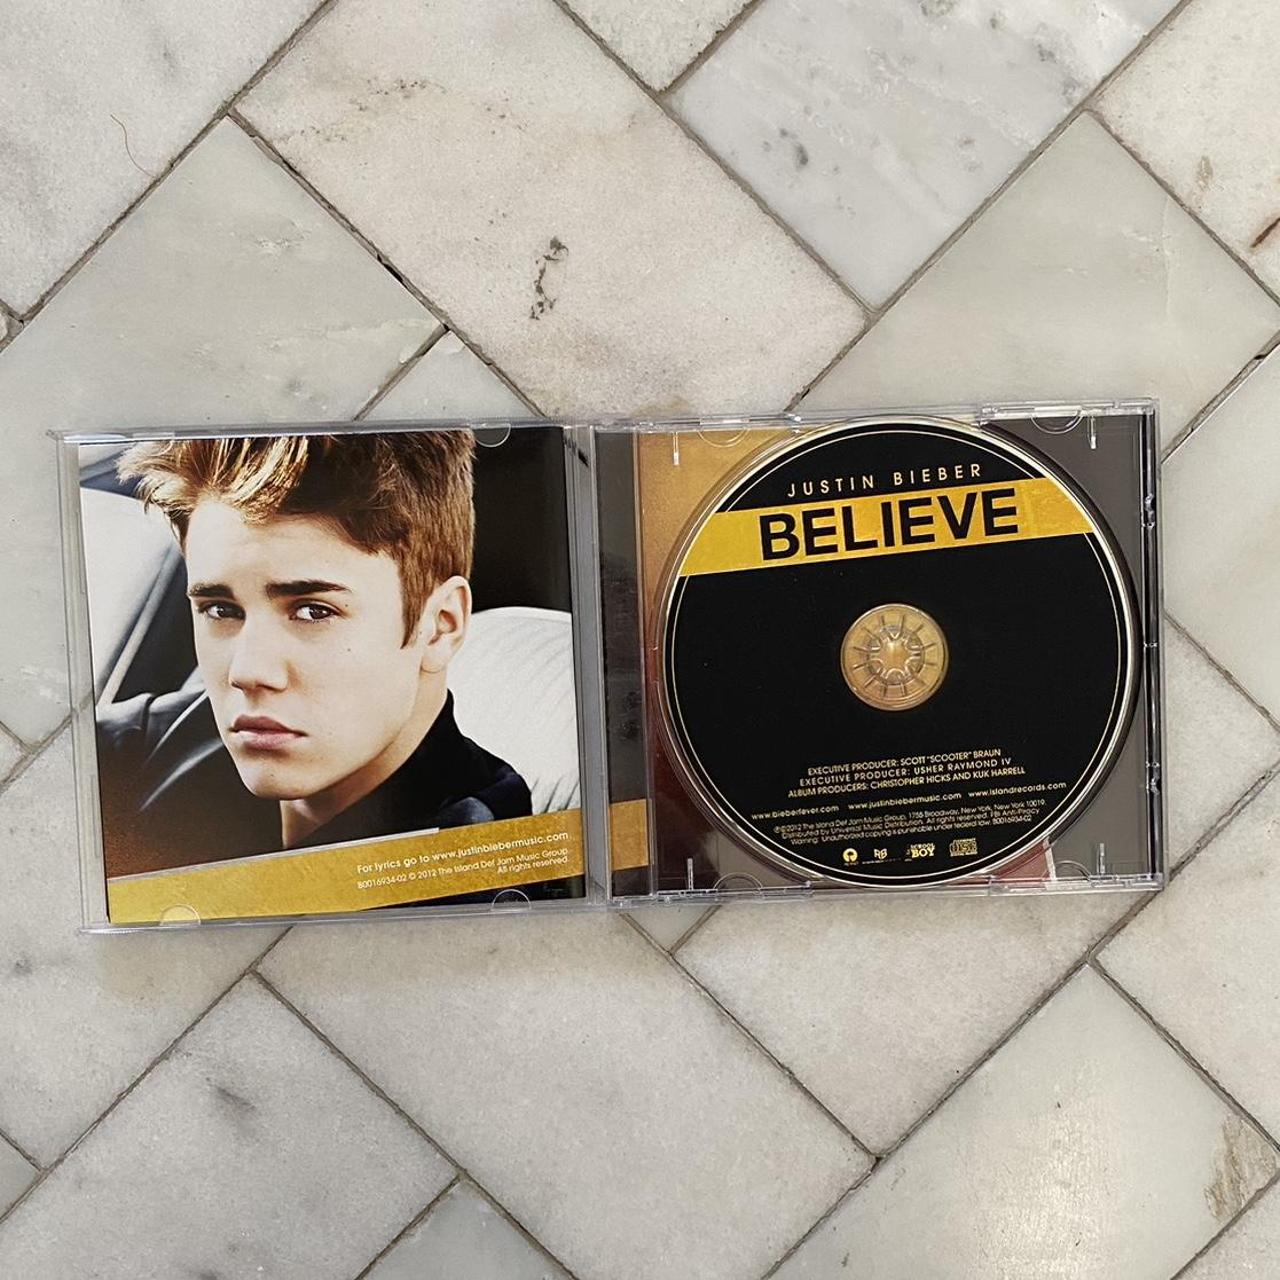 Product Image 2 - 🌟justin bieber believe cd🌟

For the